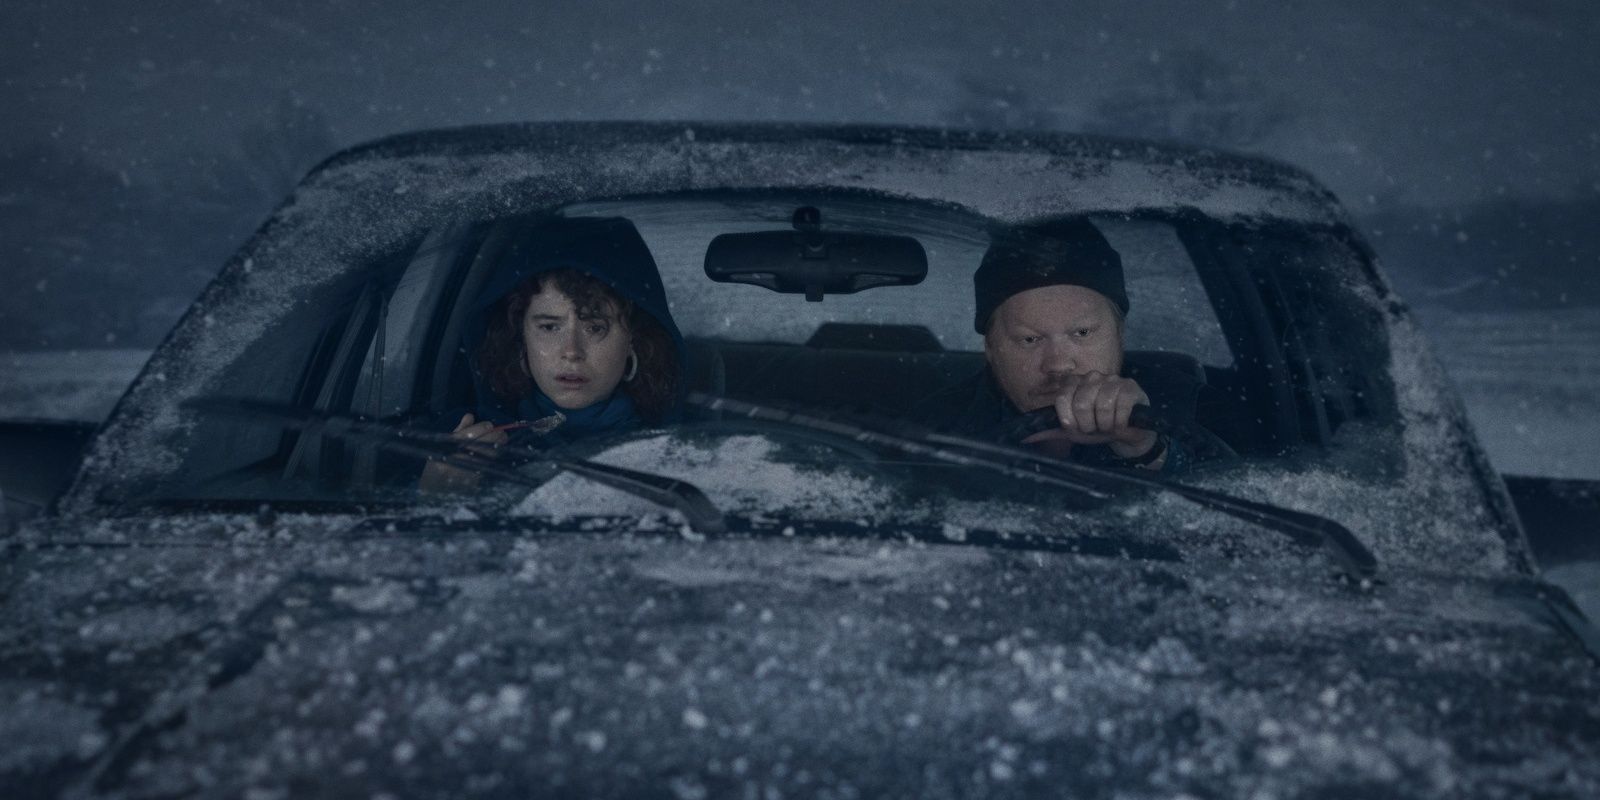 Jesse Plemons and Jessie Buckley Driving Through The Snow in a still from I'm Thinking of Ending Things.